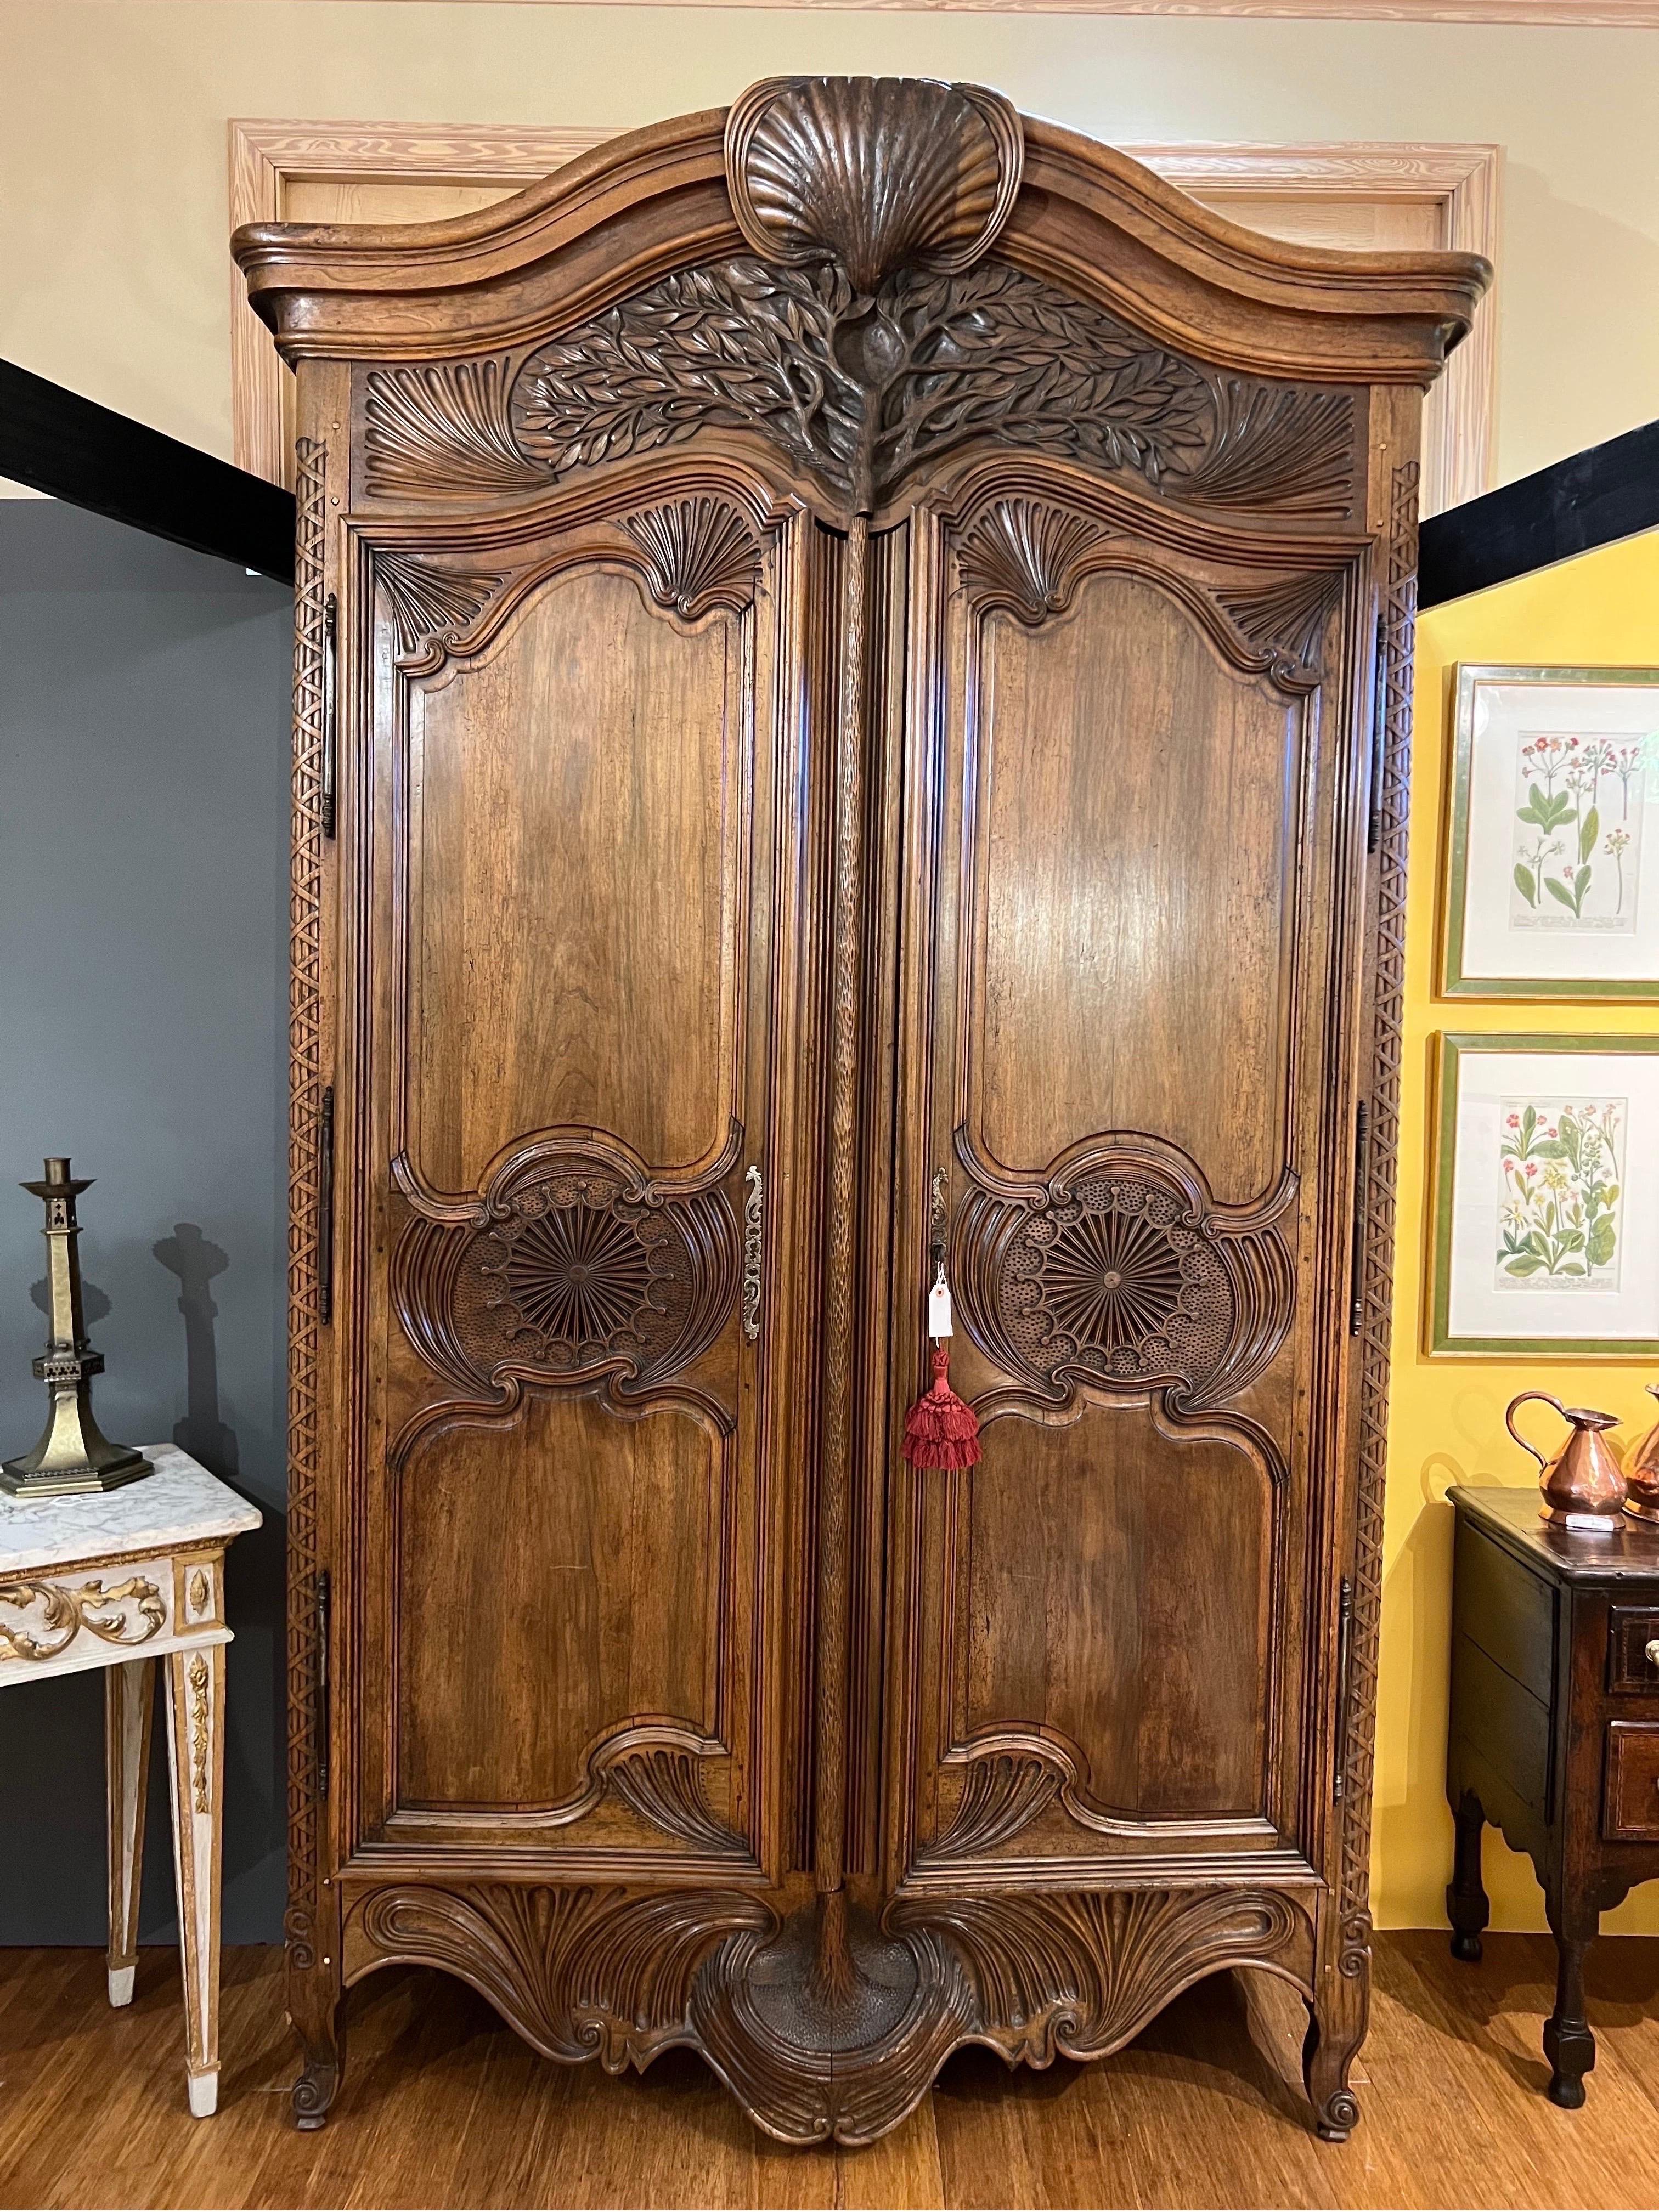 Simply the best armoire I have ever seen. This incredible work of art is from the 18th century and made in the south of France of walnut.

Clearly an important commission of the time, this armoire features the “tree of life” as the subject on the